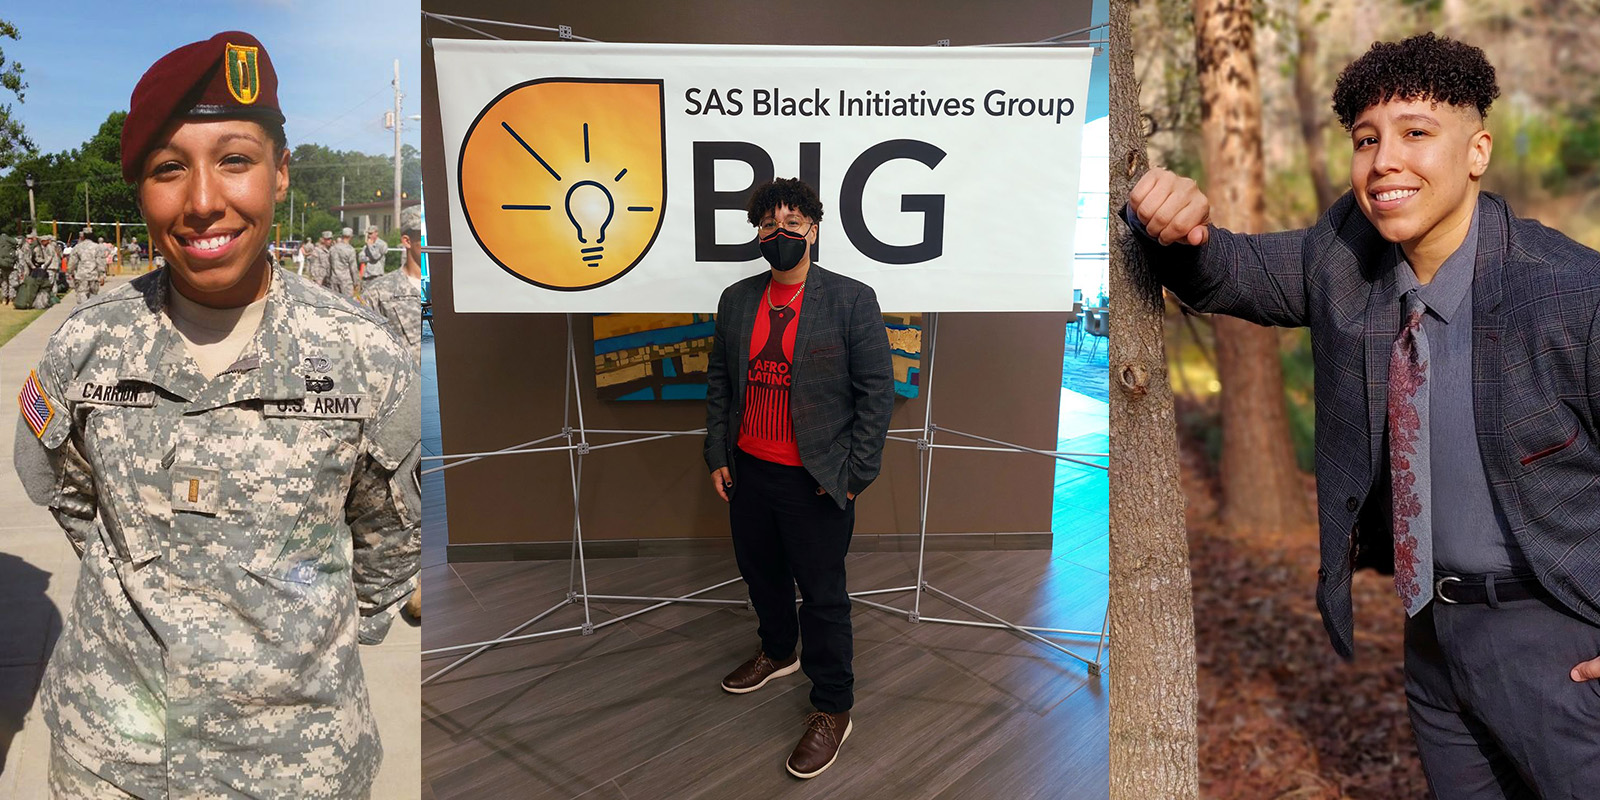 Keslie Carrion in an Army uniform, at a work event with a banner that reads Black Initiatives Group SAS BIG, and posing out doors against a tree